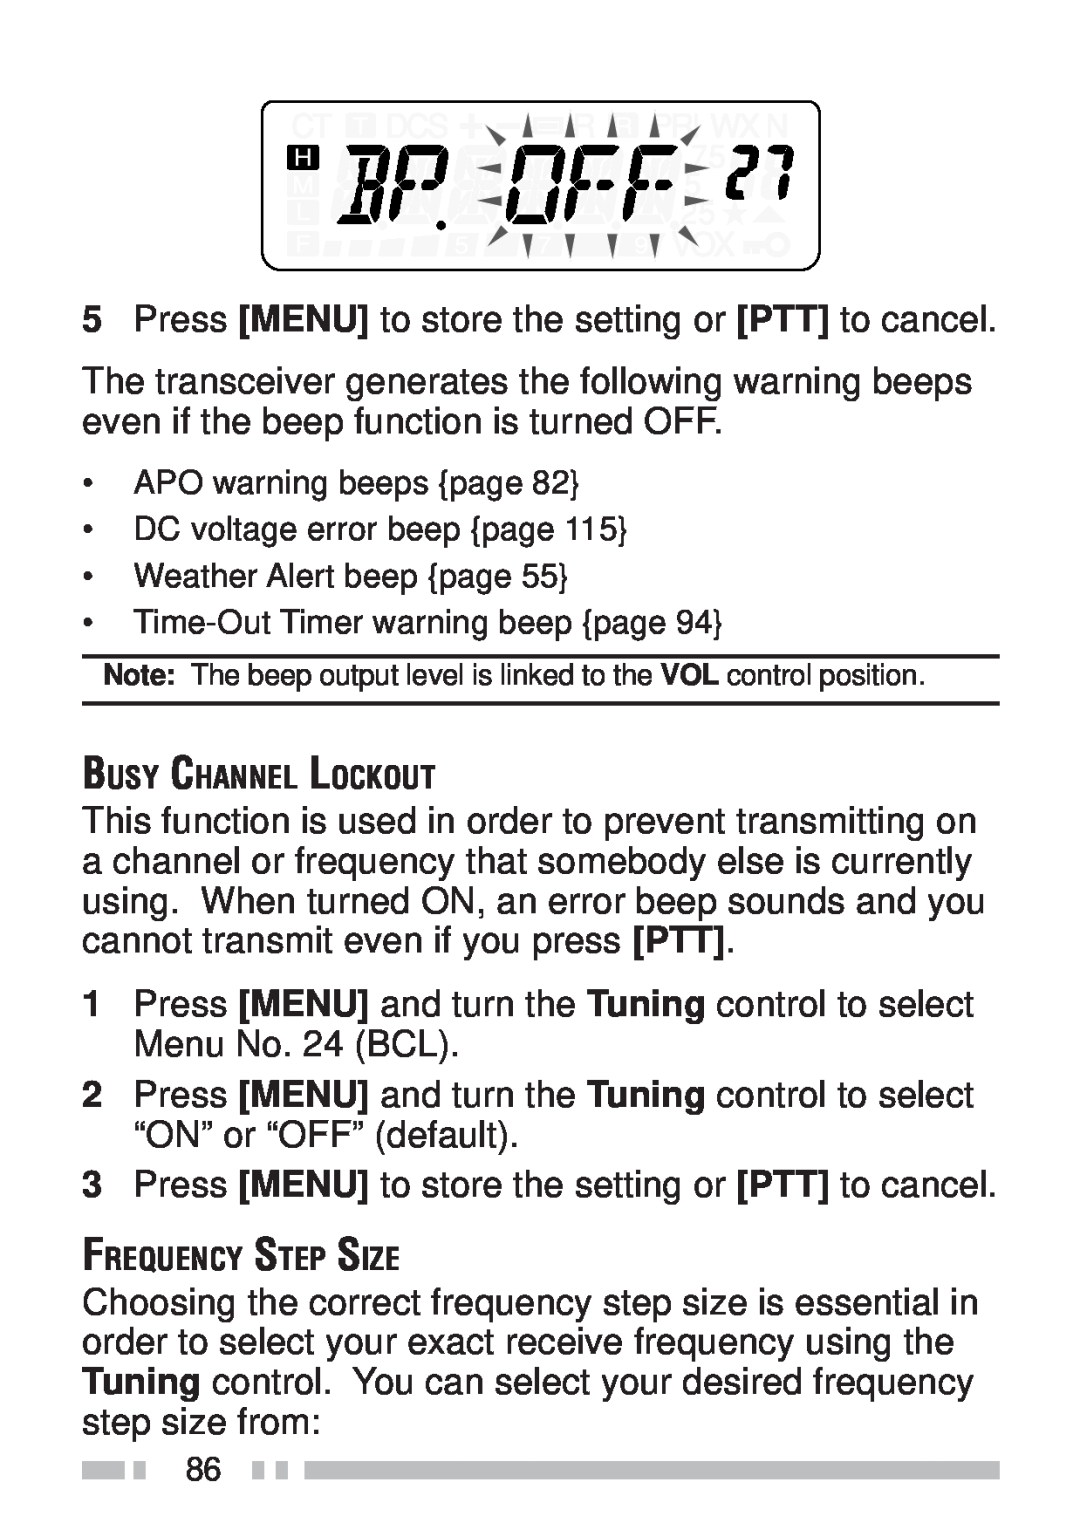 Kenwood TH-KAE, TH-K4AT, TH-K2ET, TH-K2AT instruction manual 5Press MENU to store the setting or PTT to cancel 